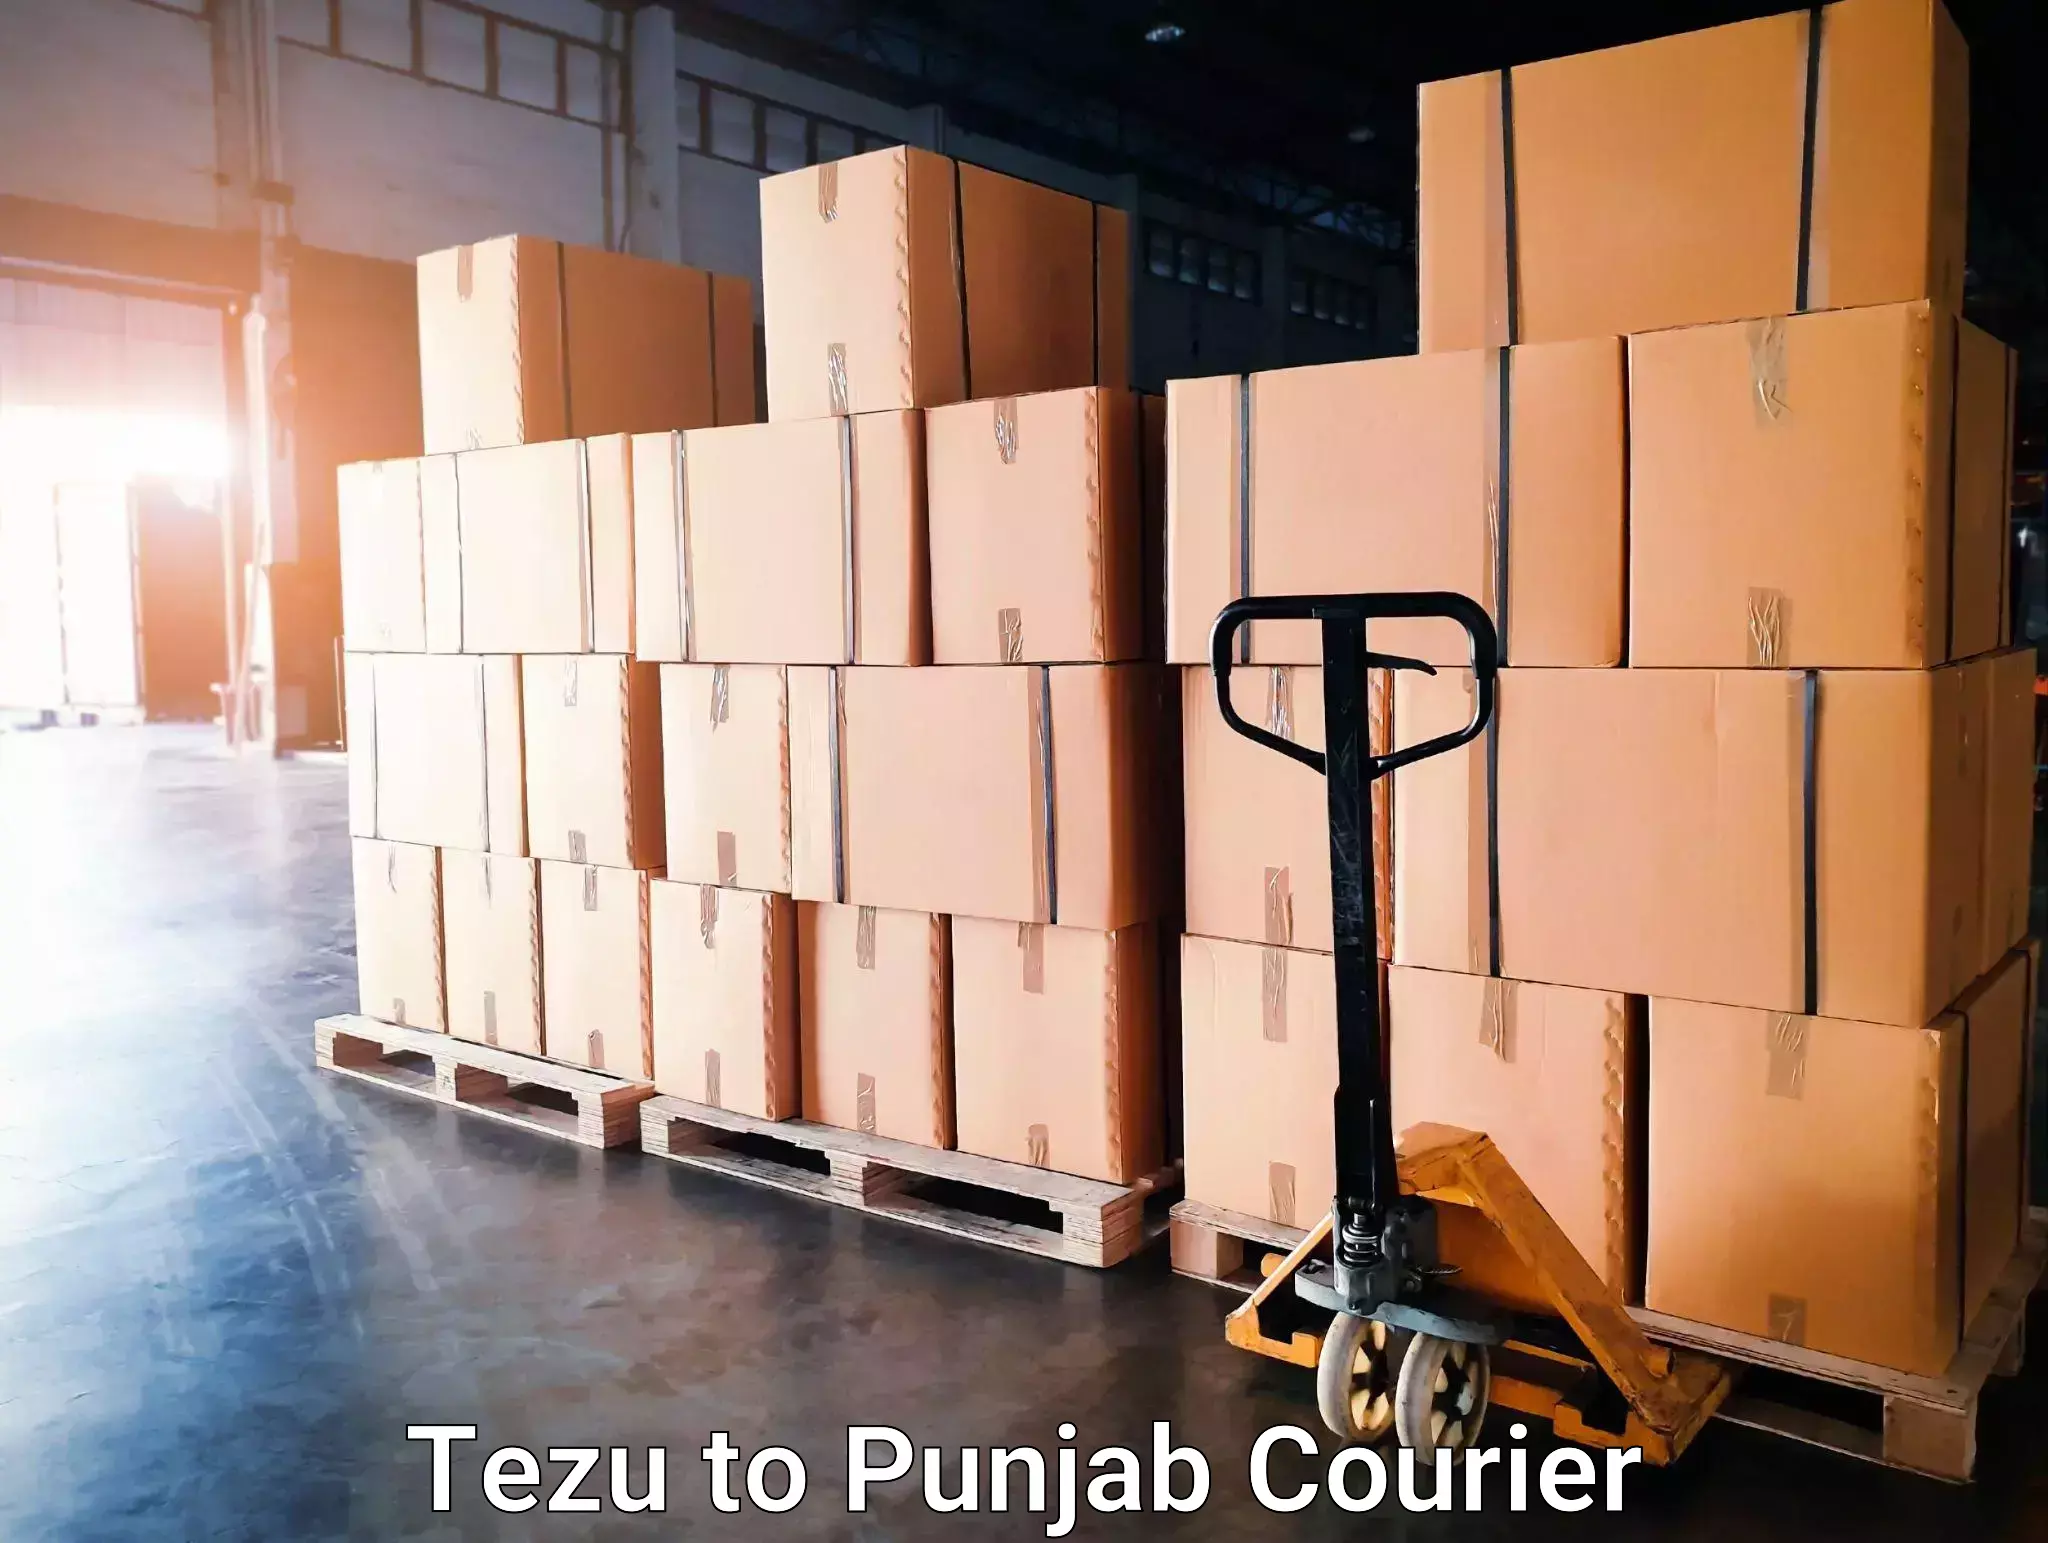 Express delivery capabilities Tezu to Central University of Punjab Bathinda